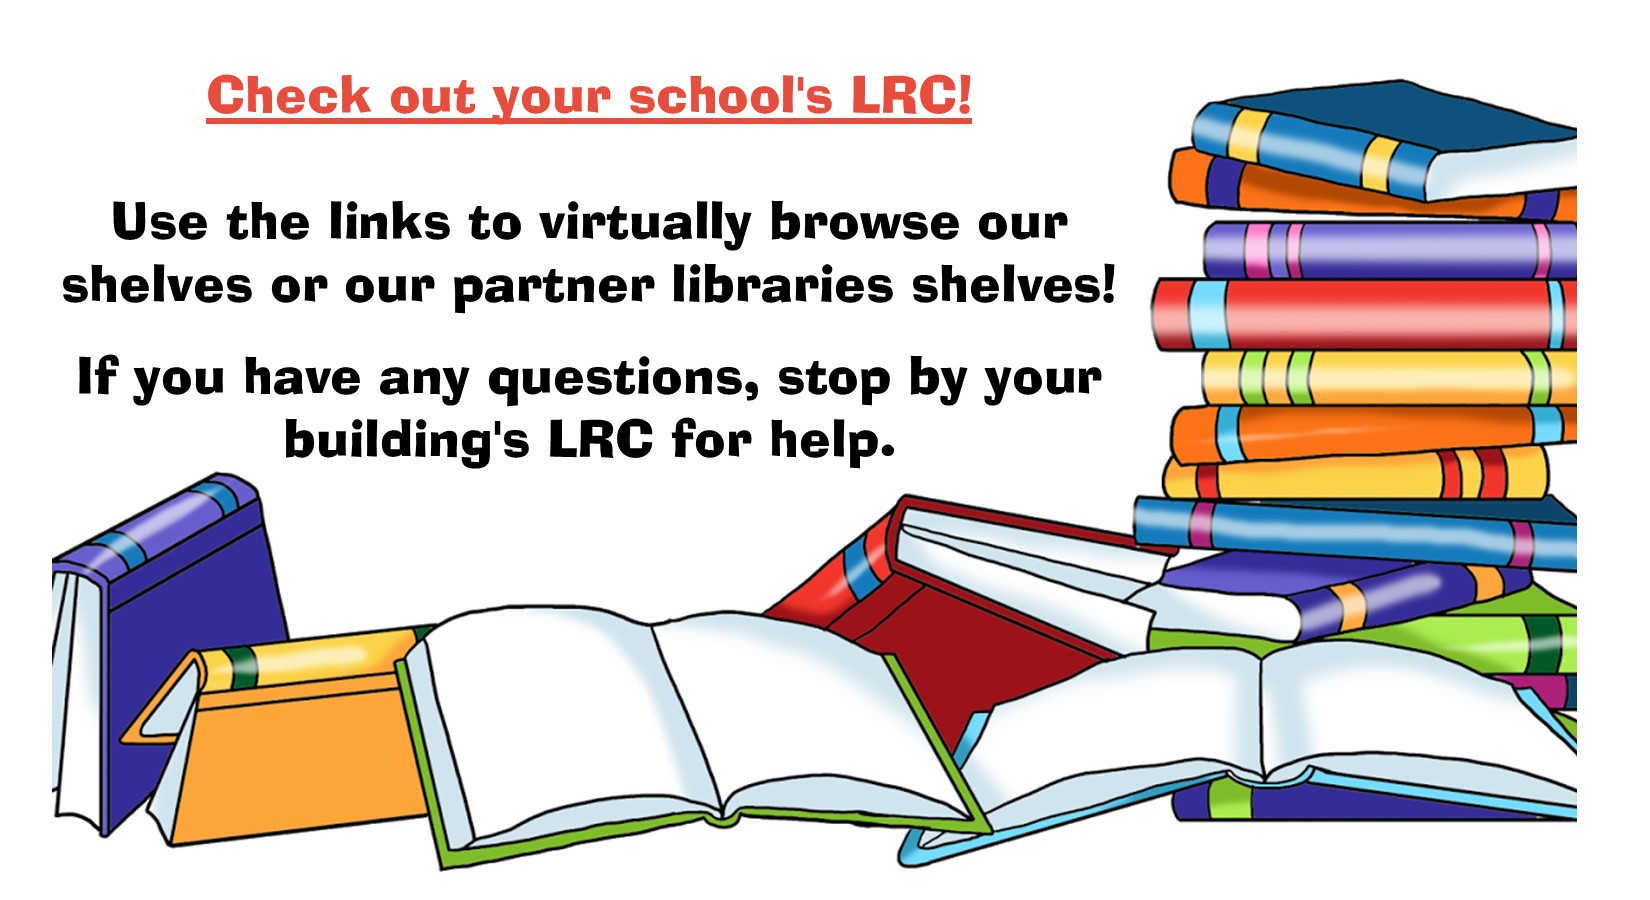 Image of books with text "Check out your school's LRC!"